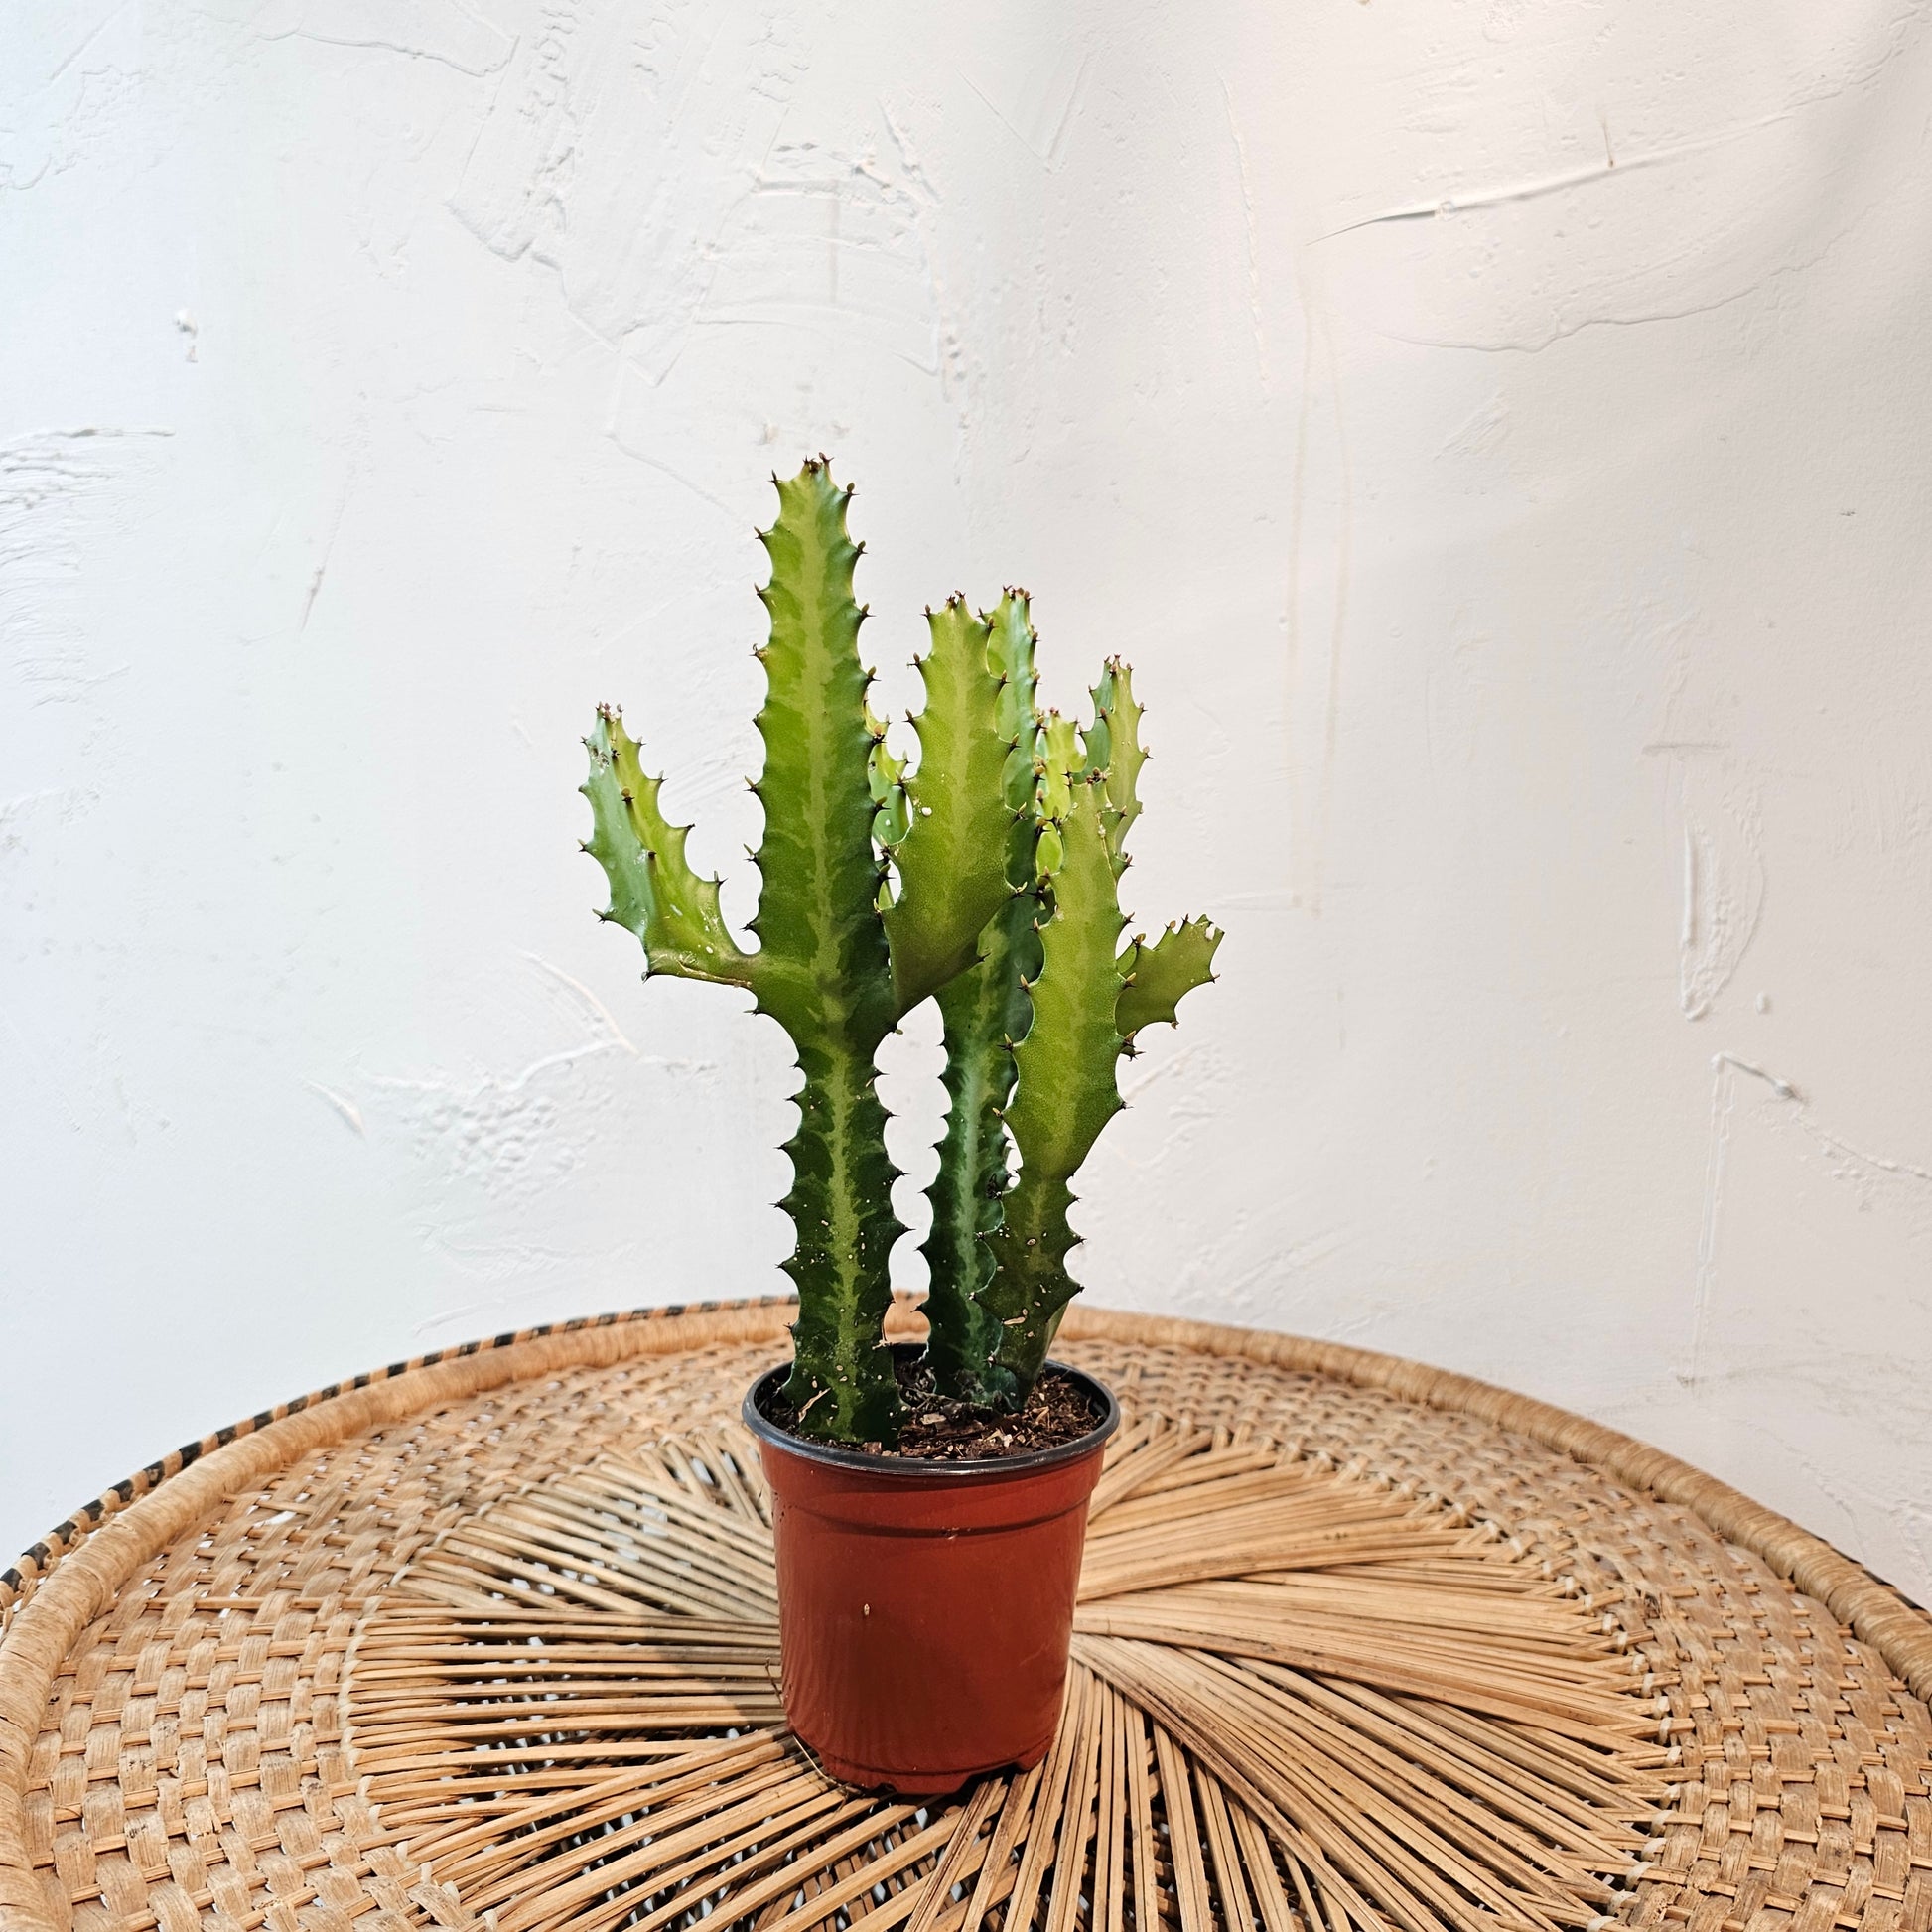 Candelabra Cactus (Euphorbia lactea) in a 4 inch pot. Indoor plant for sale by Promise Supply for delivery and pickup in Toronto